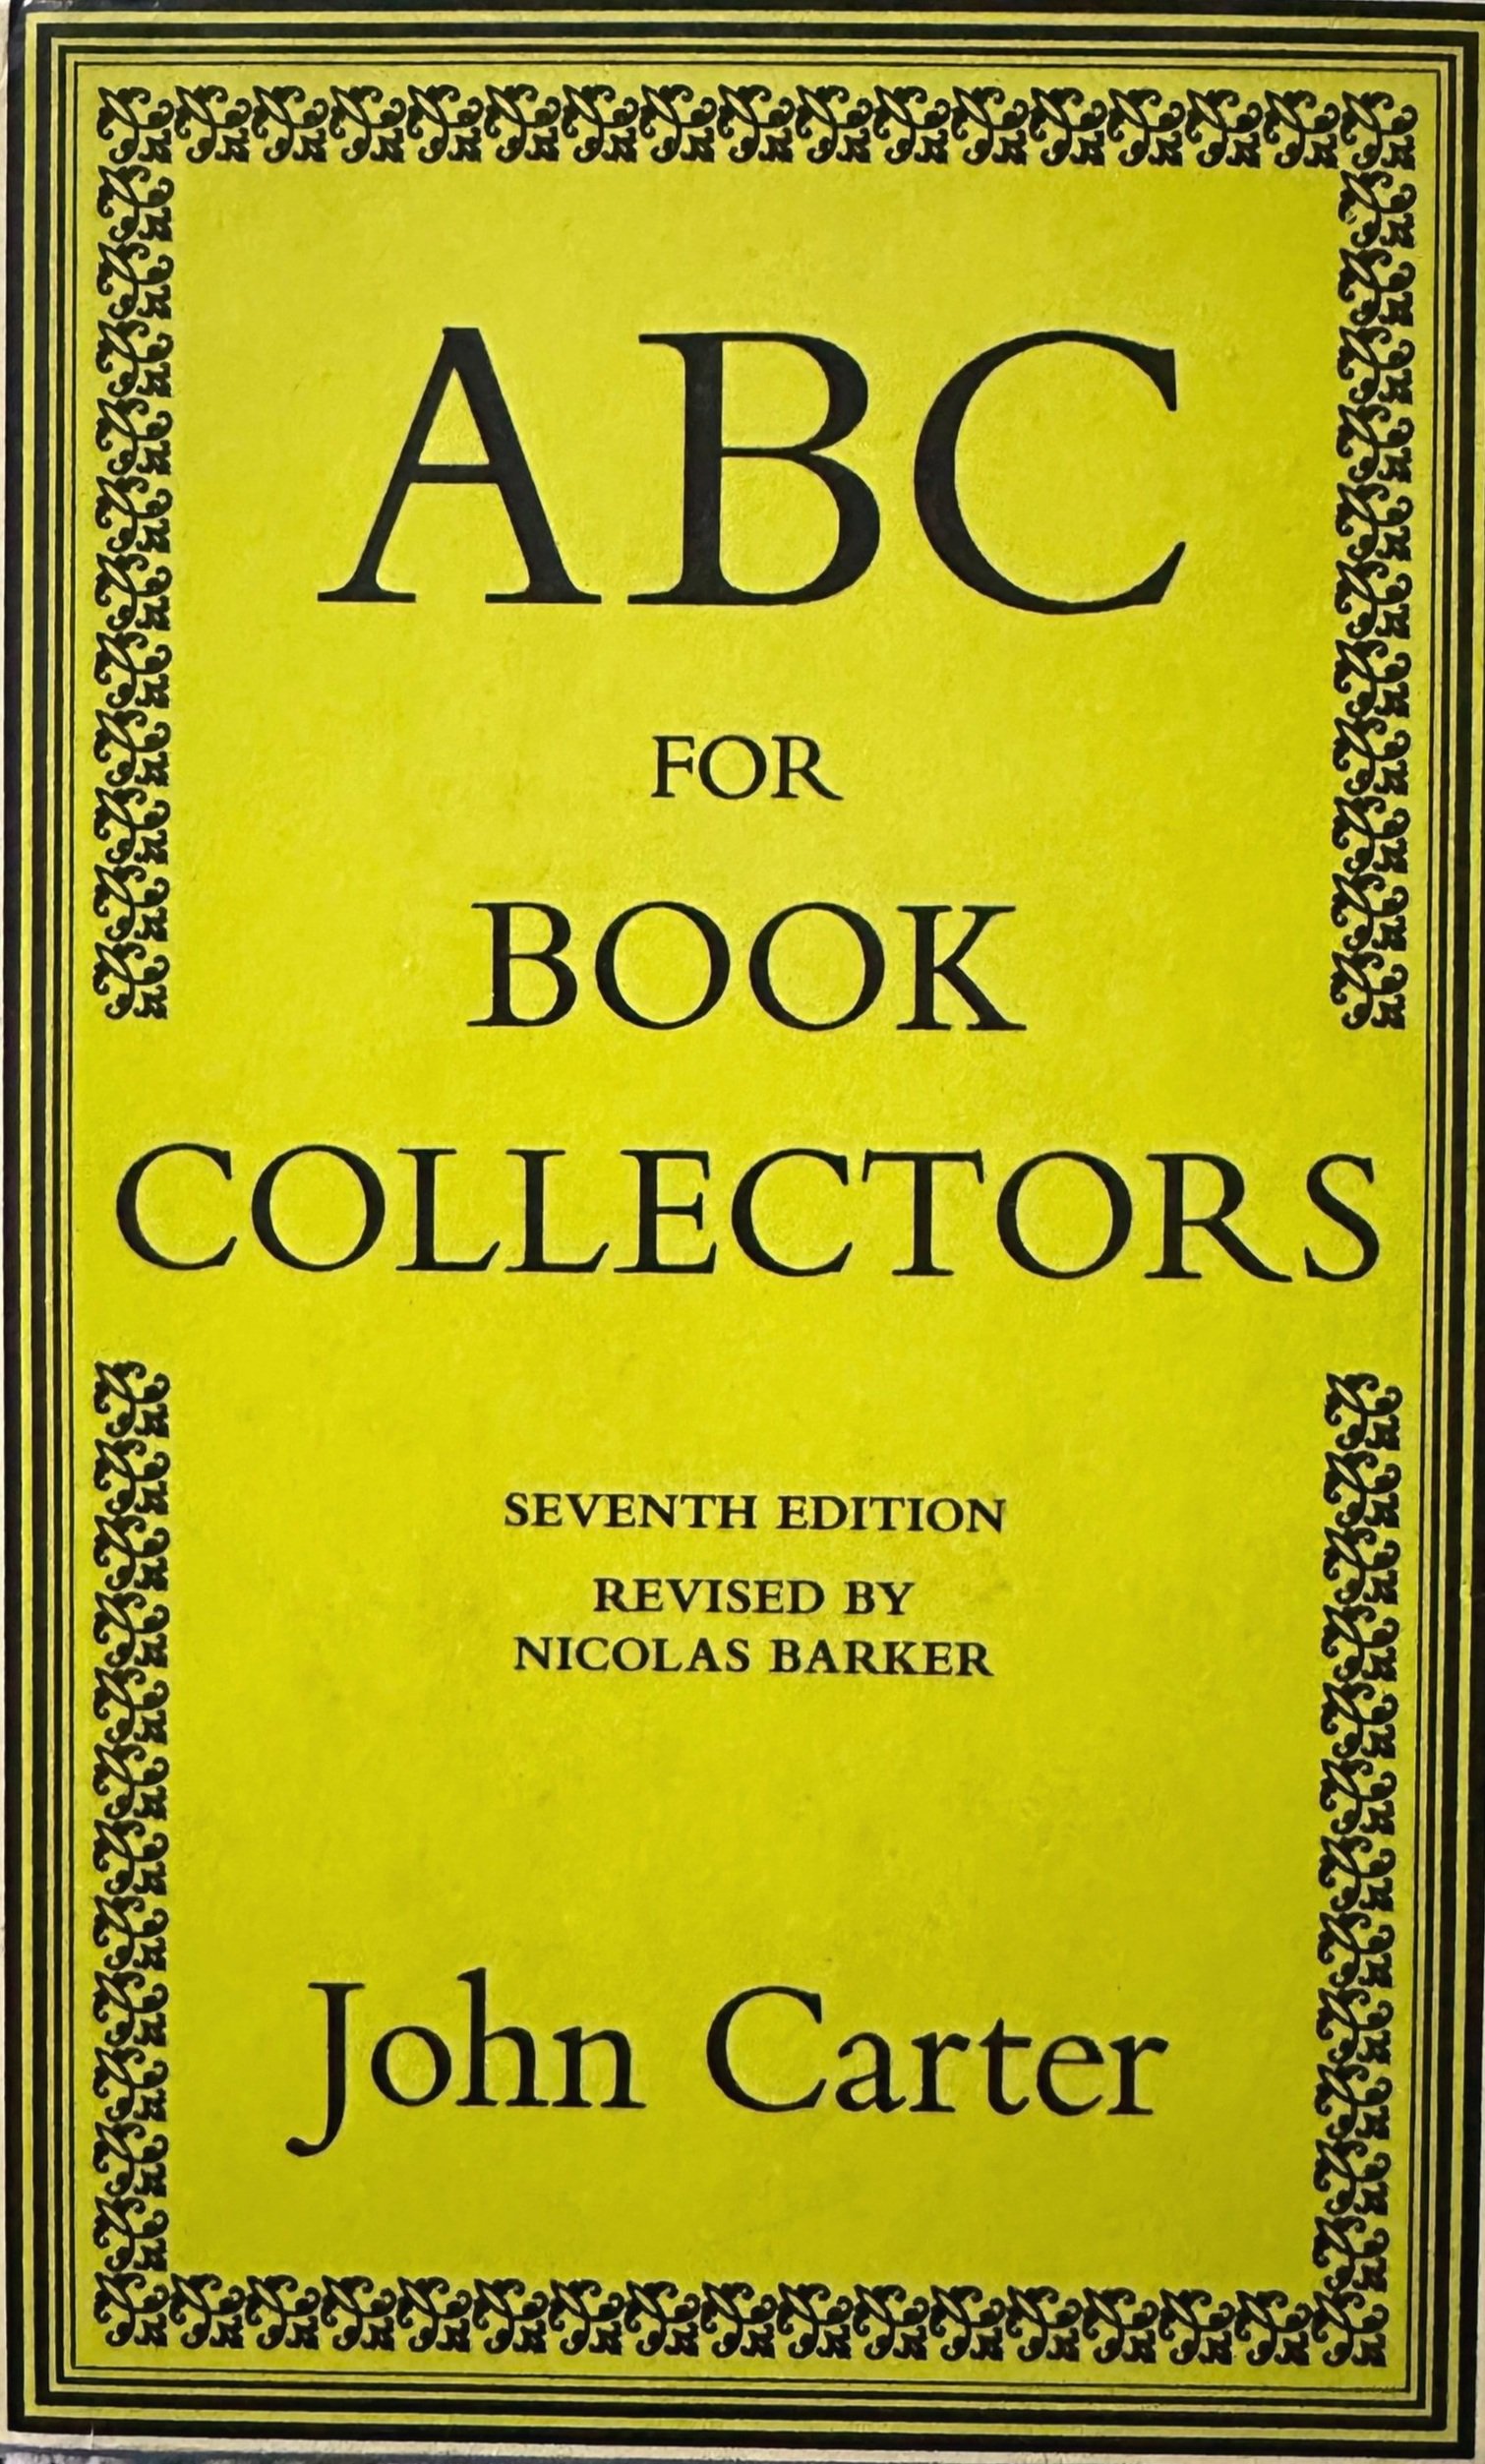 Copy of ABC for Book Collectors